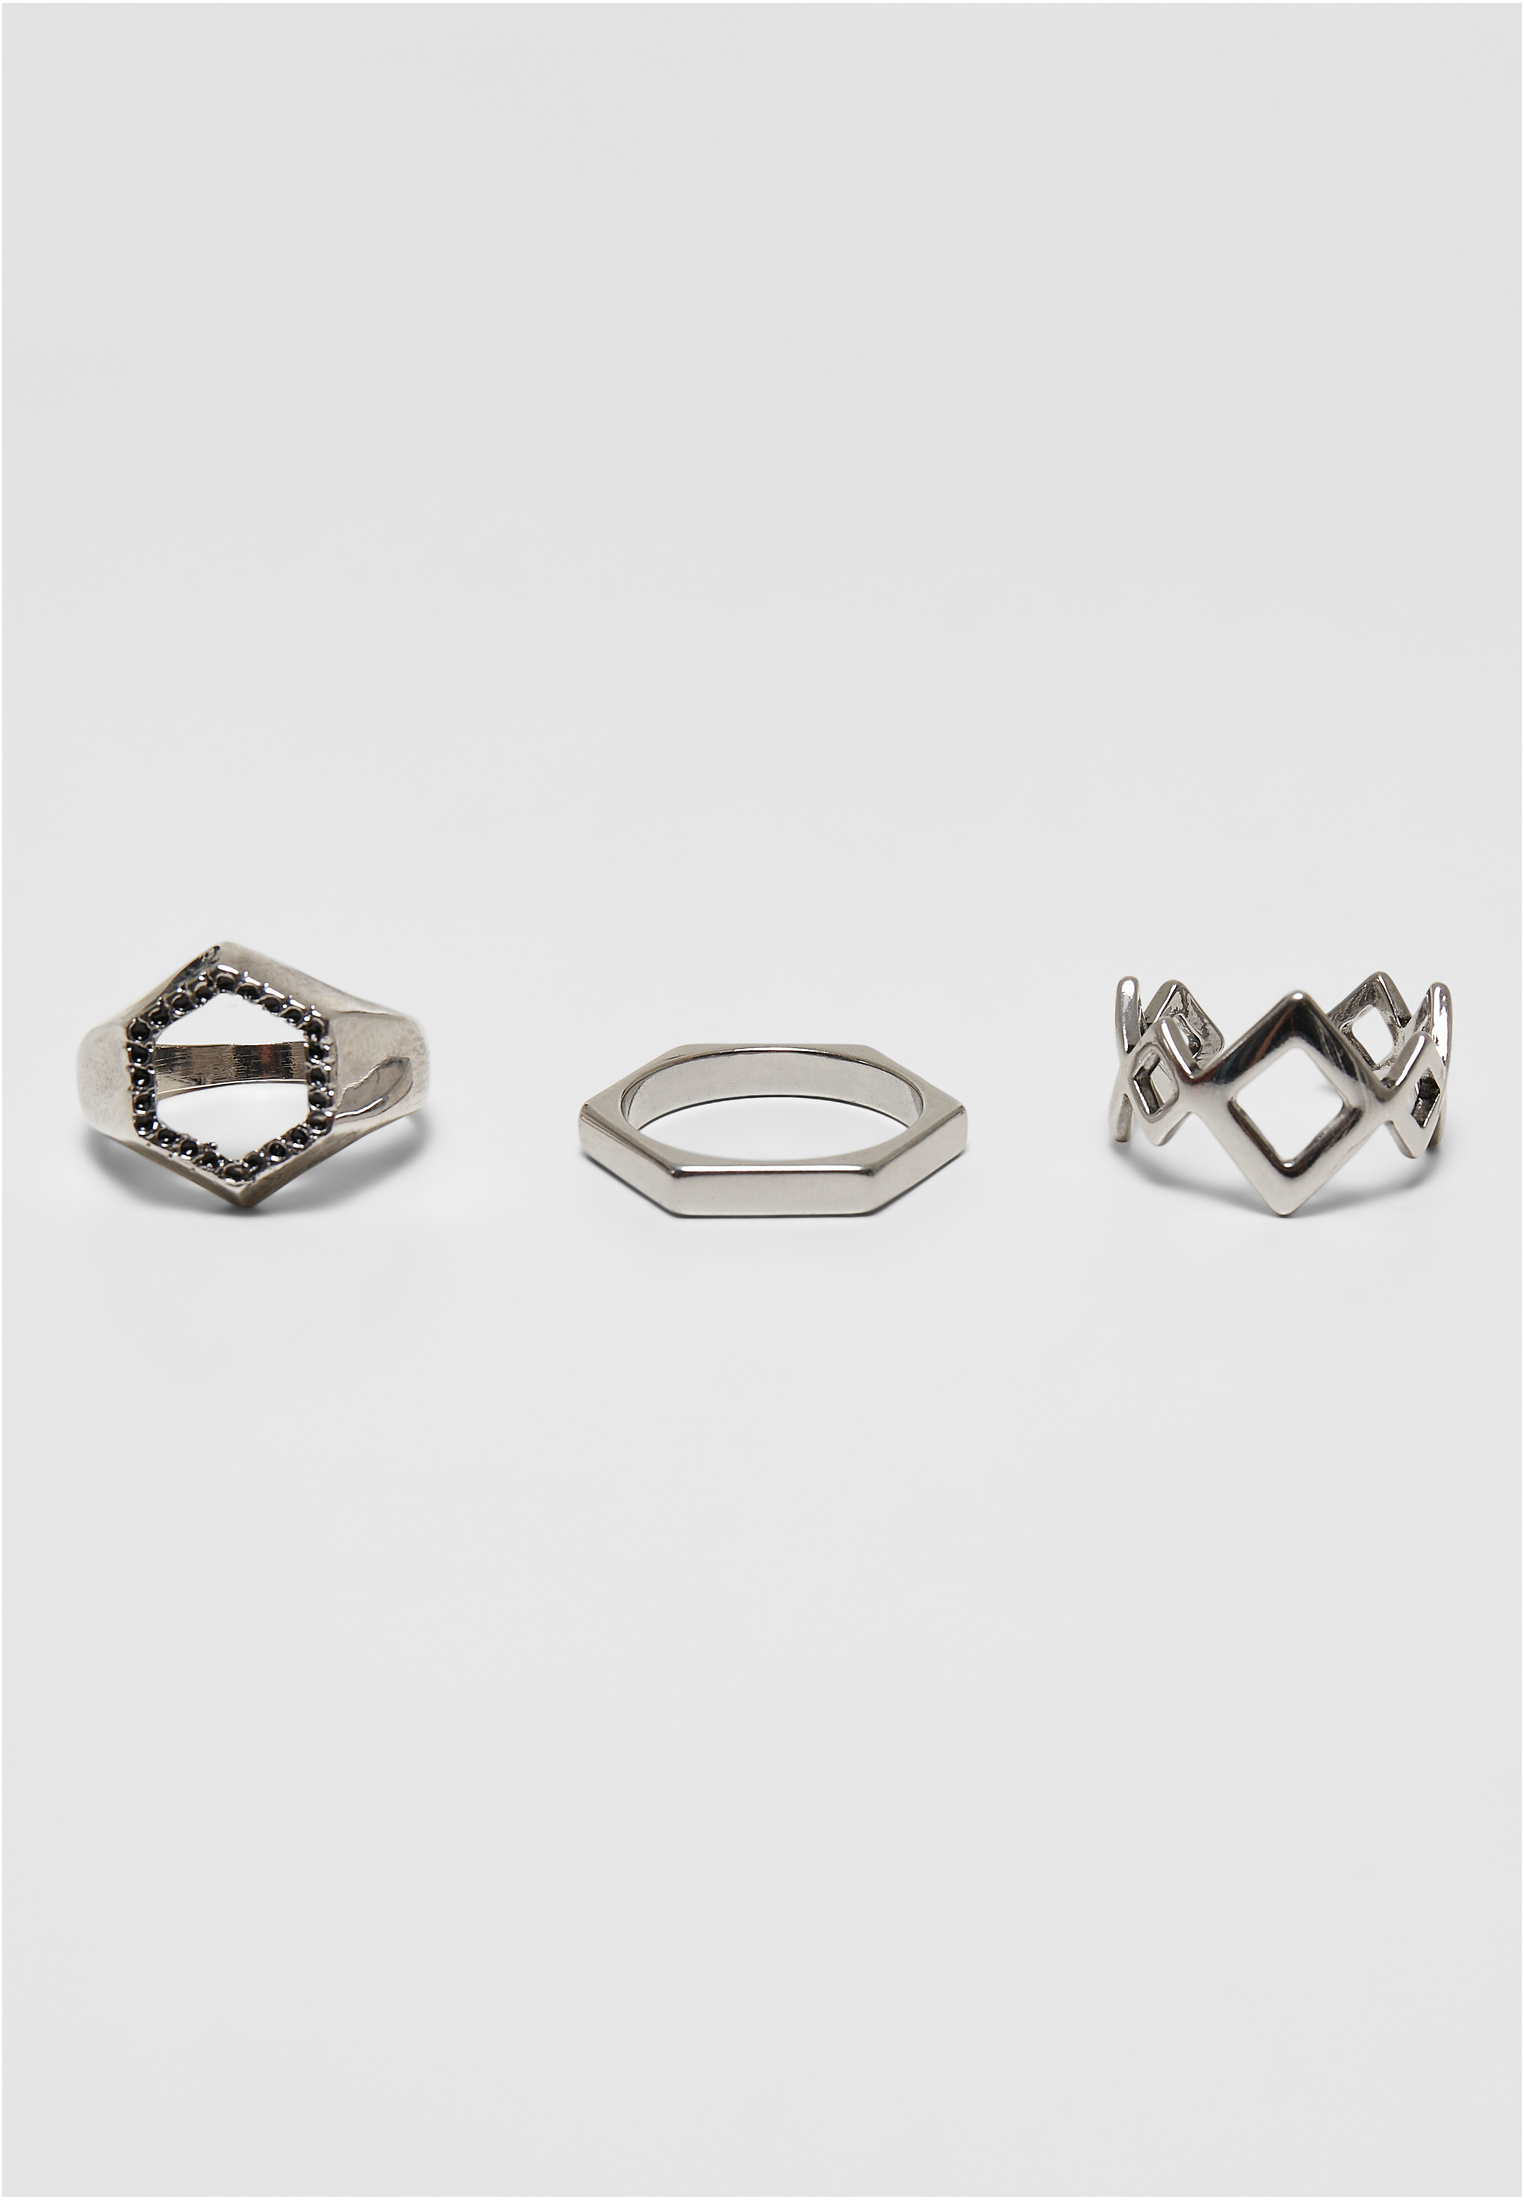 Graphic Ring 3-Pack